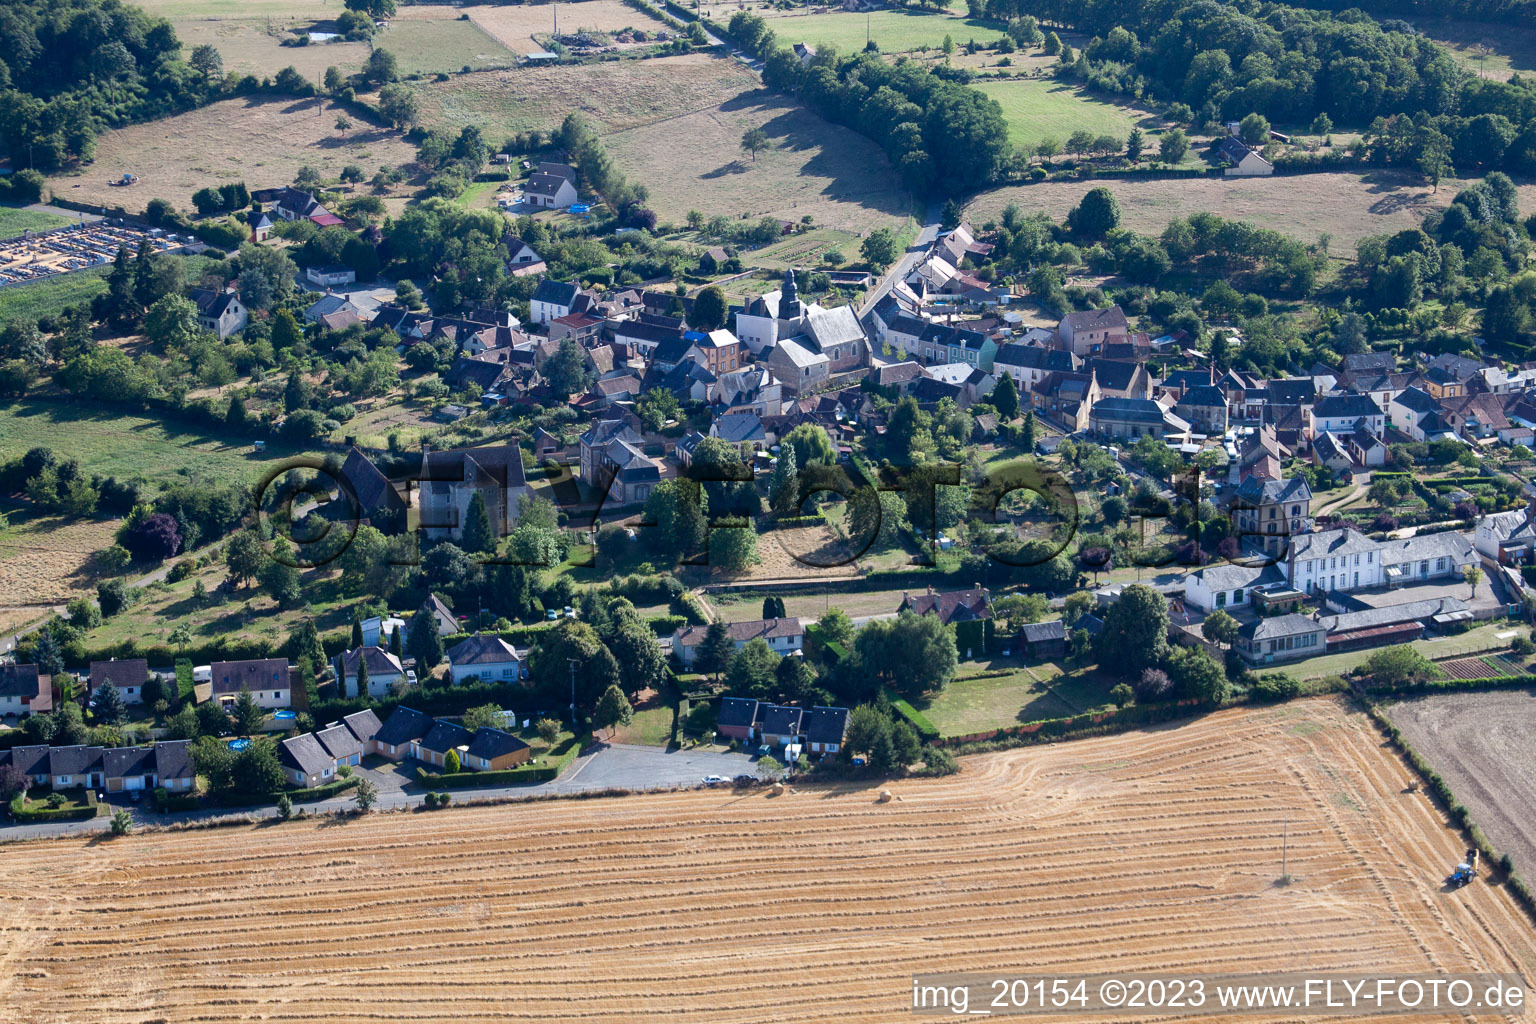 Coudrecieux in the state Sarthe, France seen from above